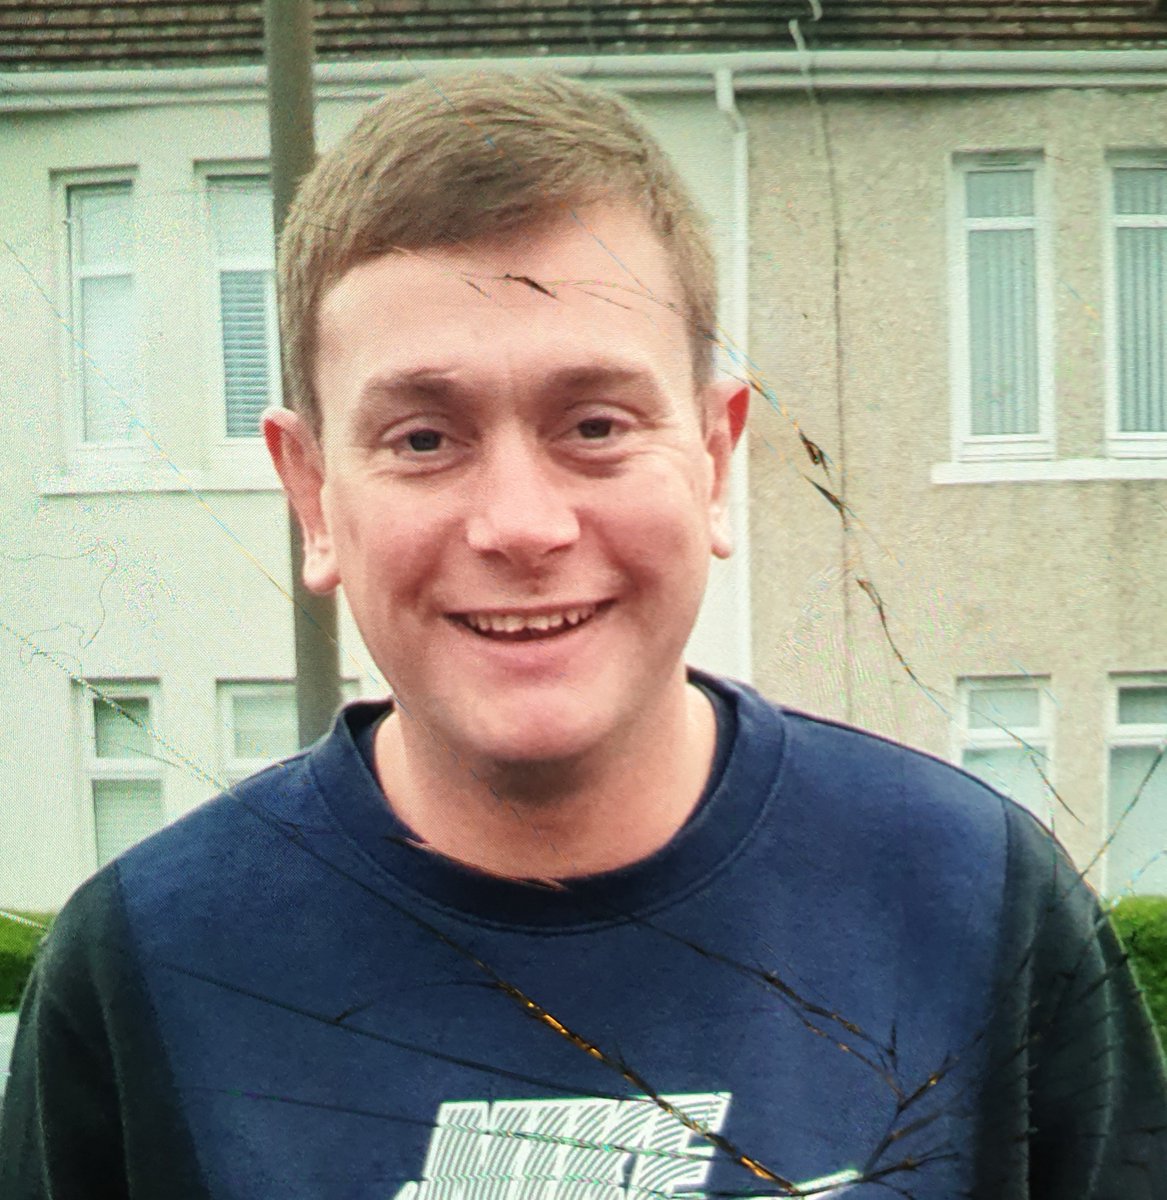 MISSING PERSON DAVID ANDERSON Police in Greater Glasgow are seeking the assistance of the public in tracing David Anderson who is missing from the Springburn area of Glasgow. See link for further details:- ow.ly/FXgw50LvG8w